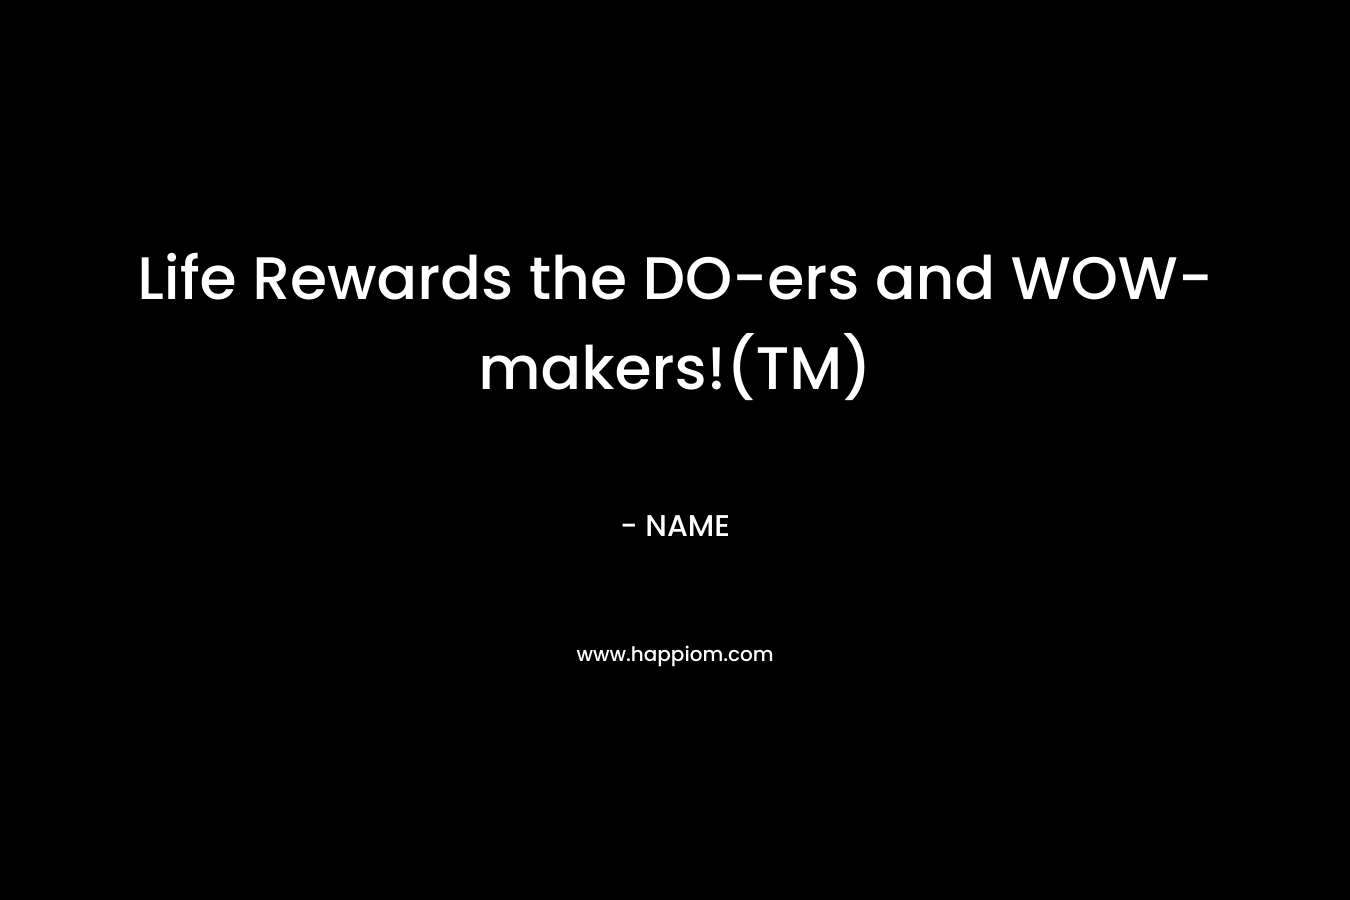 Life Rewards the DO-ers and WOW-makers!(TM)